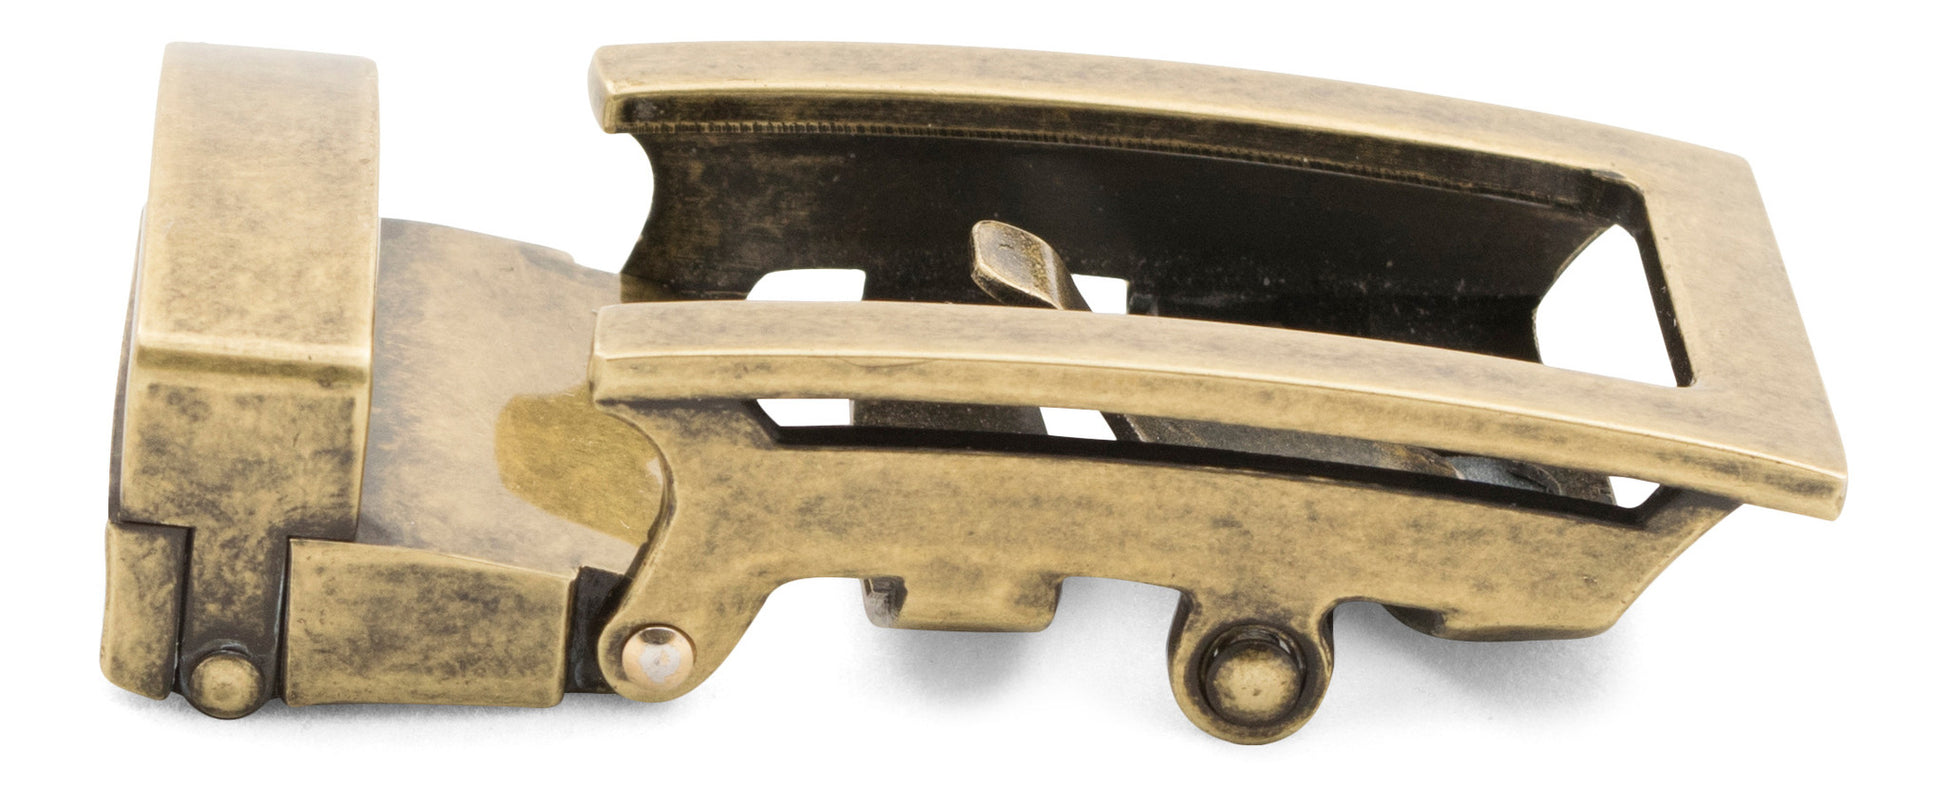 Men's traditional ratchet belt buckle in antiqued gold with a 1.25-inch width, right side view.